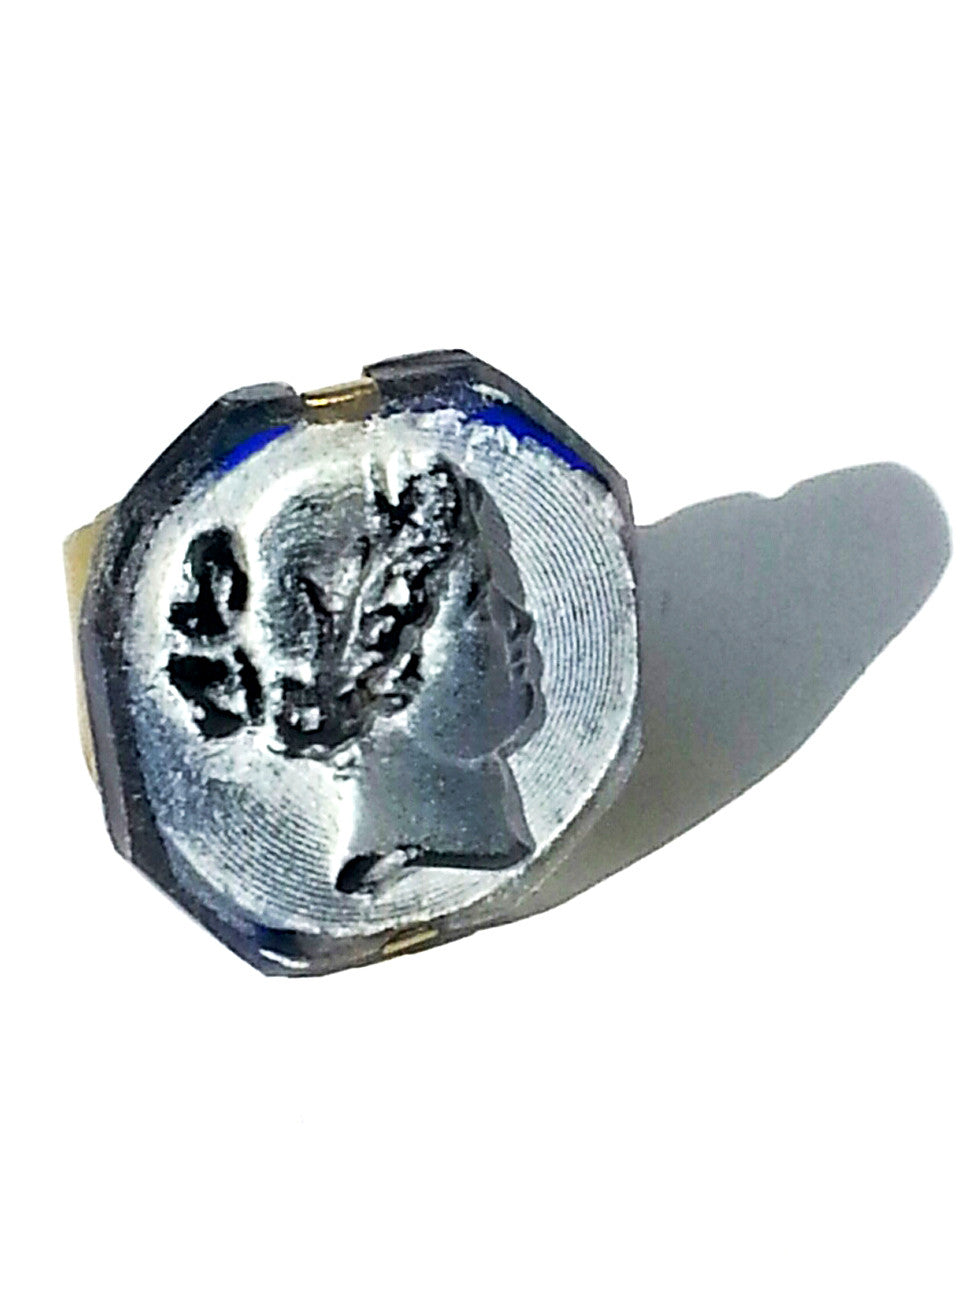 Ring Hand Cast French Glass Lady with Laurel